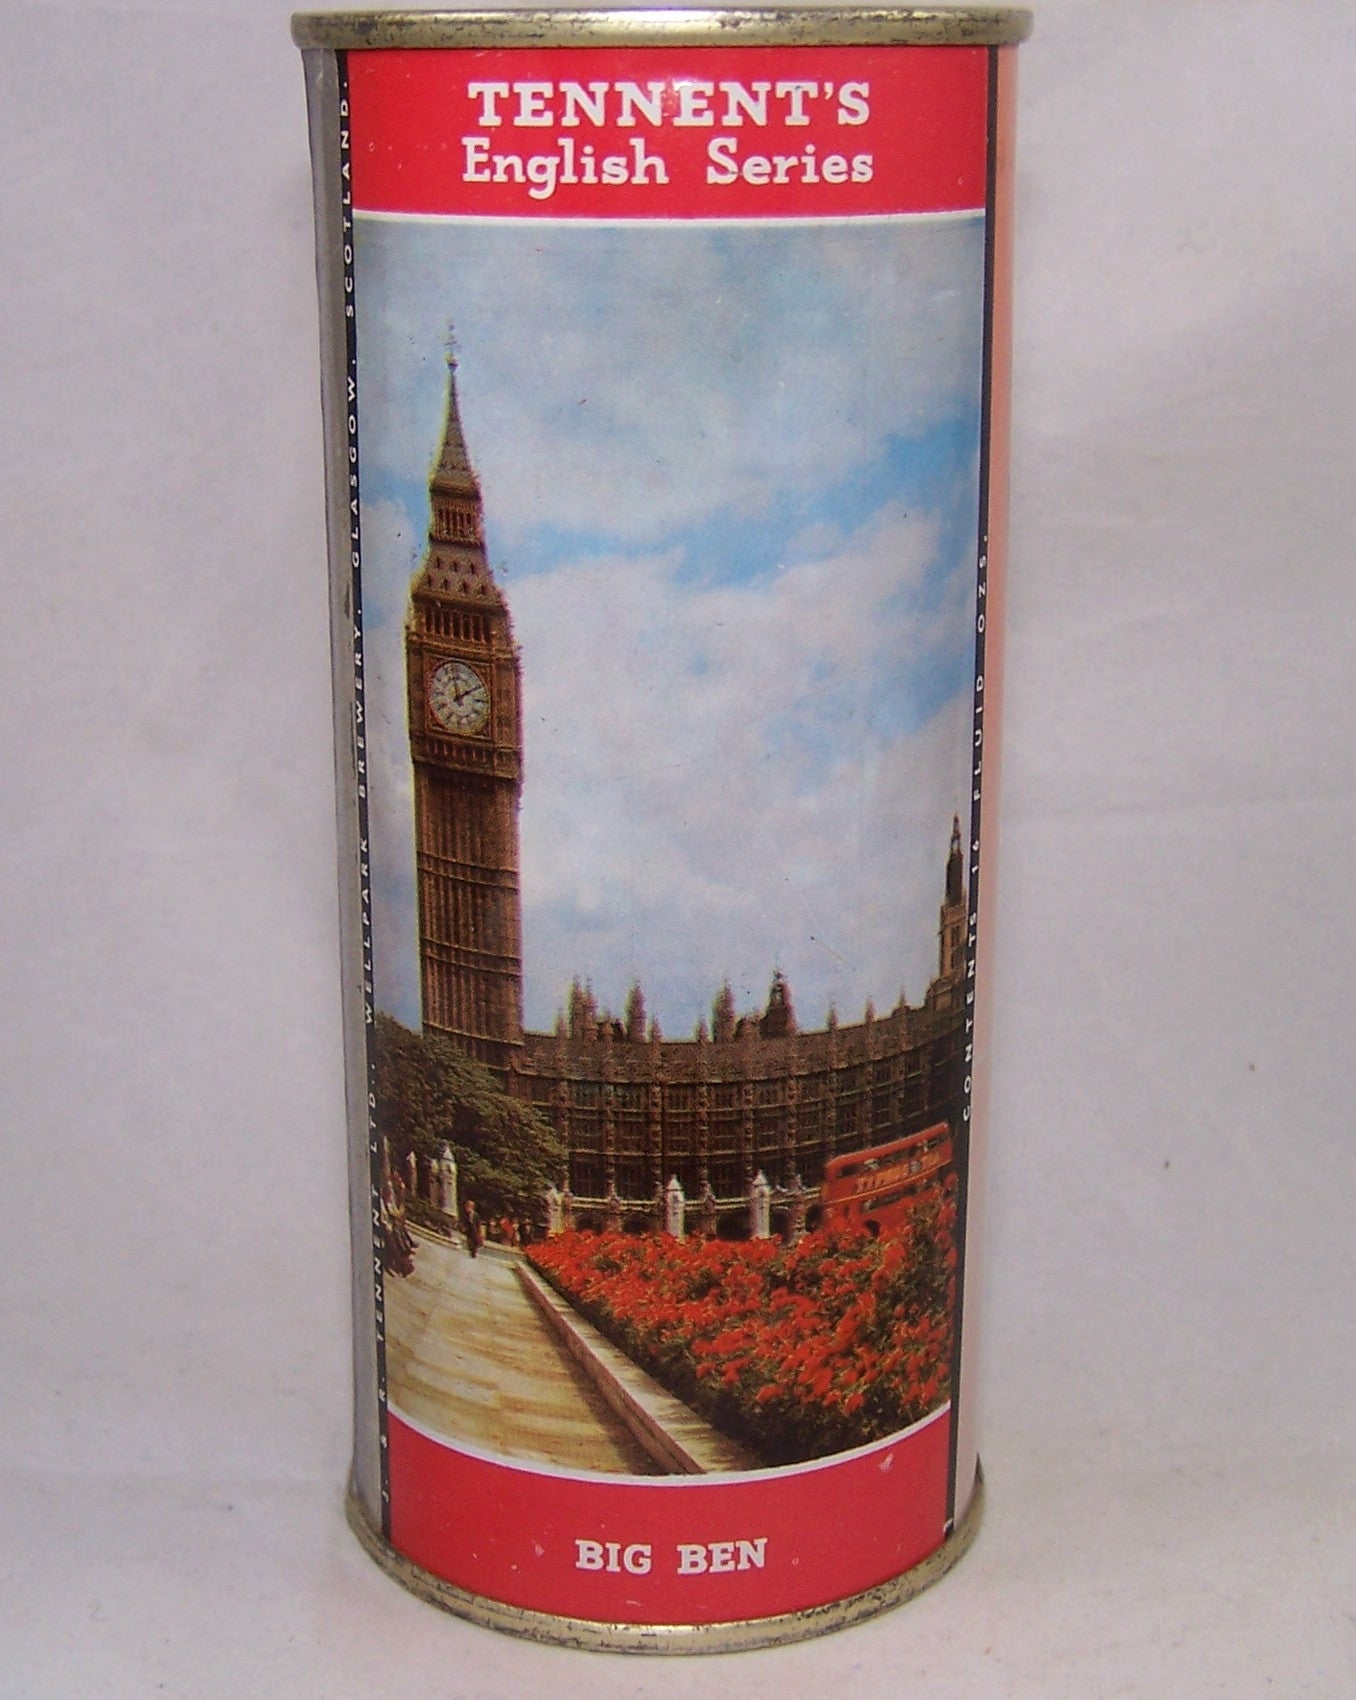 Tennent's Sweet Stout, English Series ( Big Ben), Grade A1+ Sold on 12/19/16